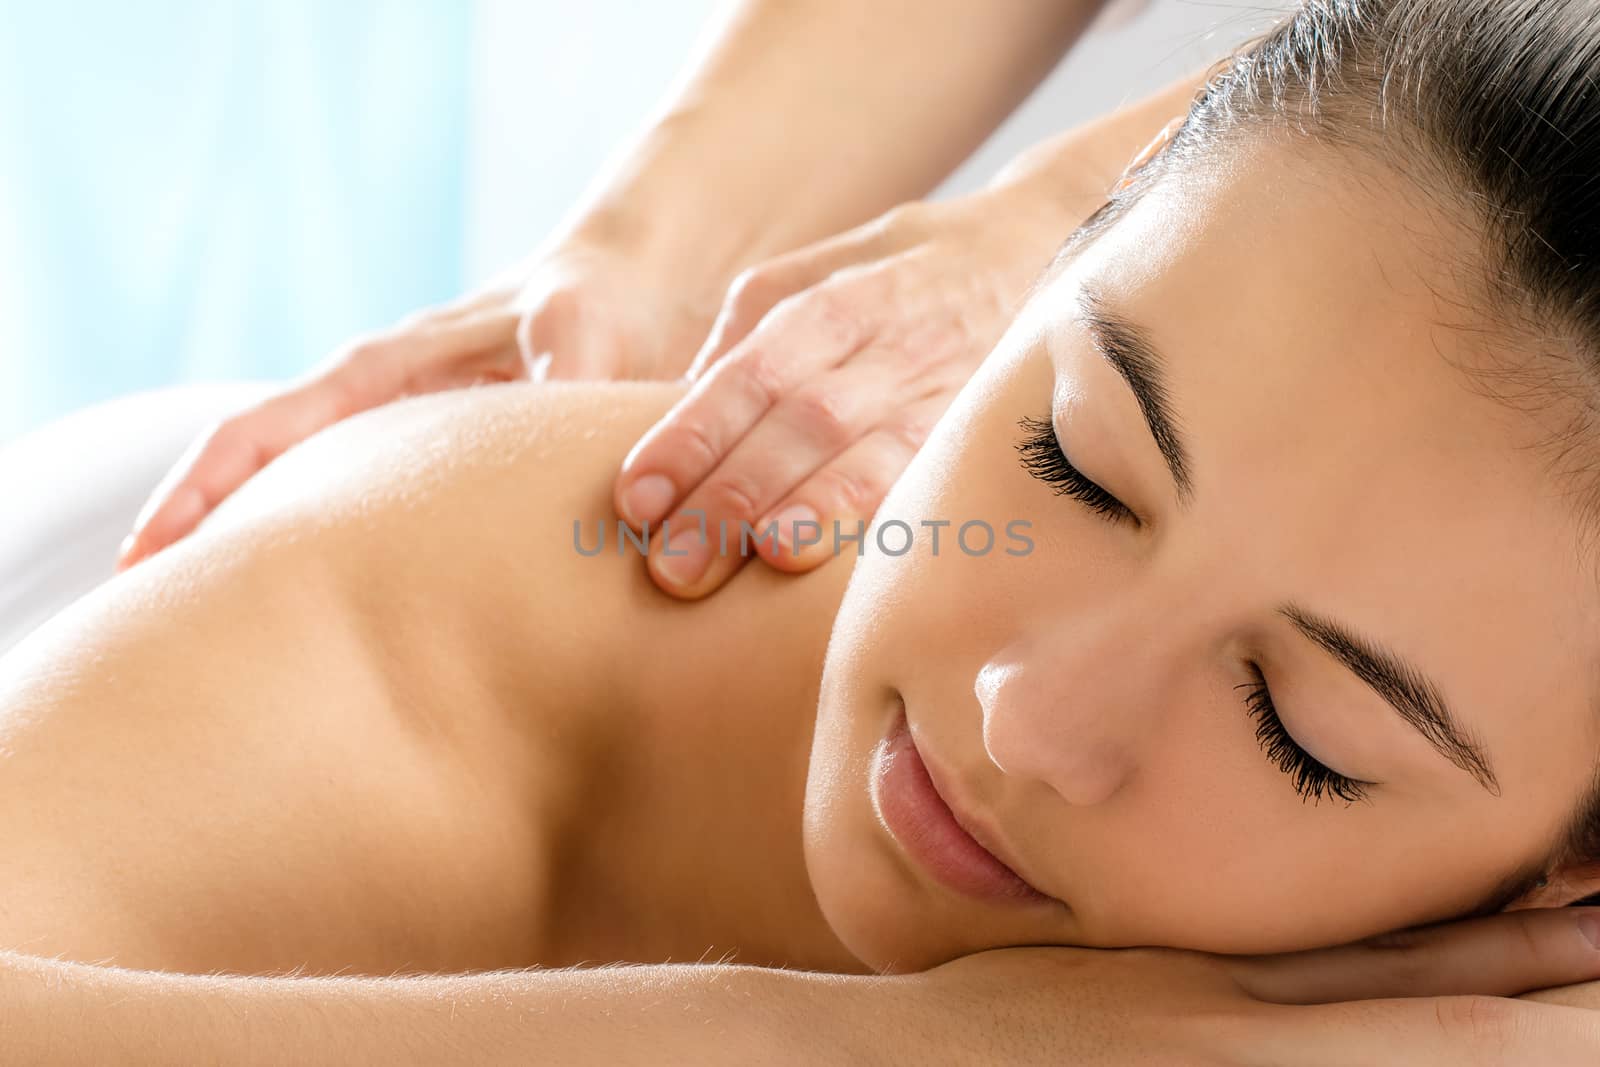 Woman with relaxing face expression in spa. by karelnoppe